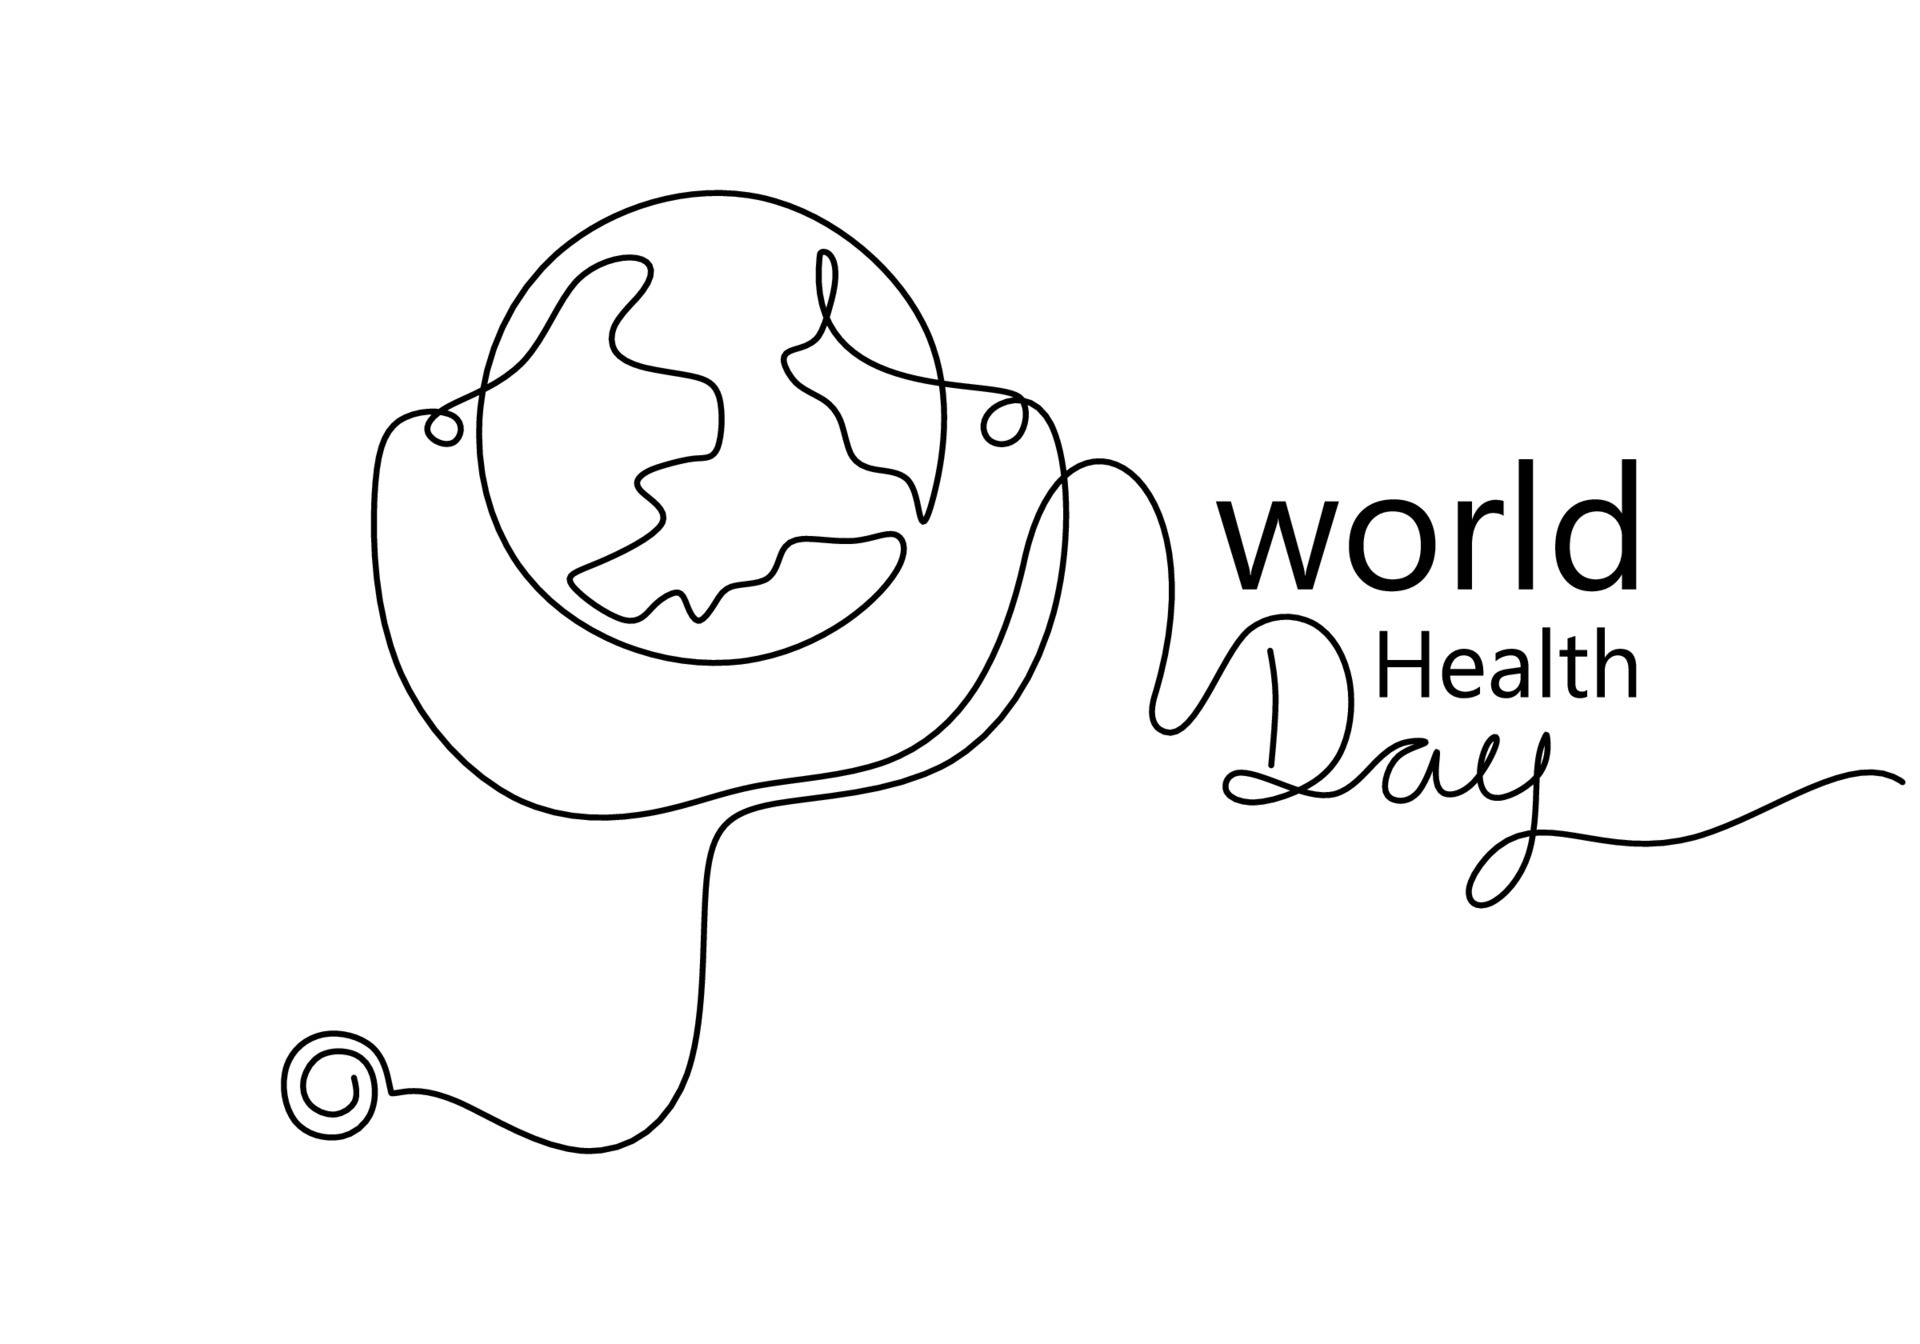 World Health Day Concept With Hand Draw Lettering And Healthy Lifestyle  Illustration. Vector. Royalty Free SVG, Cliparts, Vectors, and Stock  Illustration. Image 98521523.